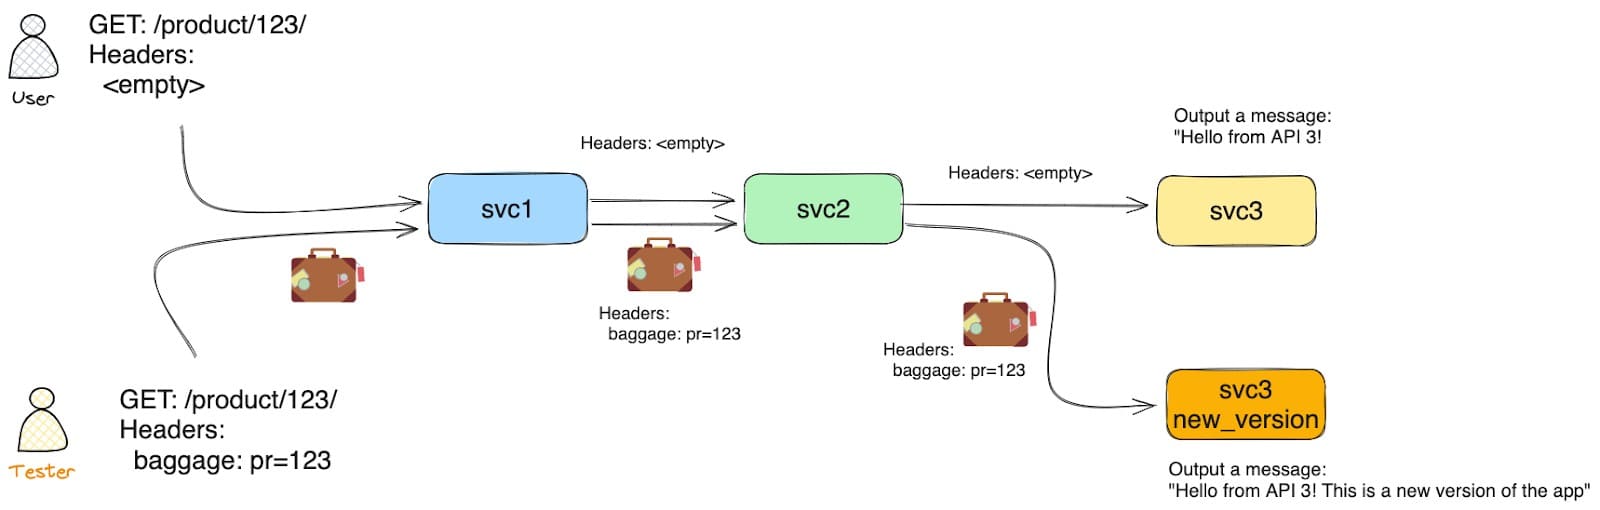 Diagram flow showing svc1 to svc3 and svc3 new_version